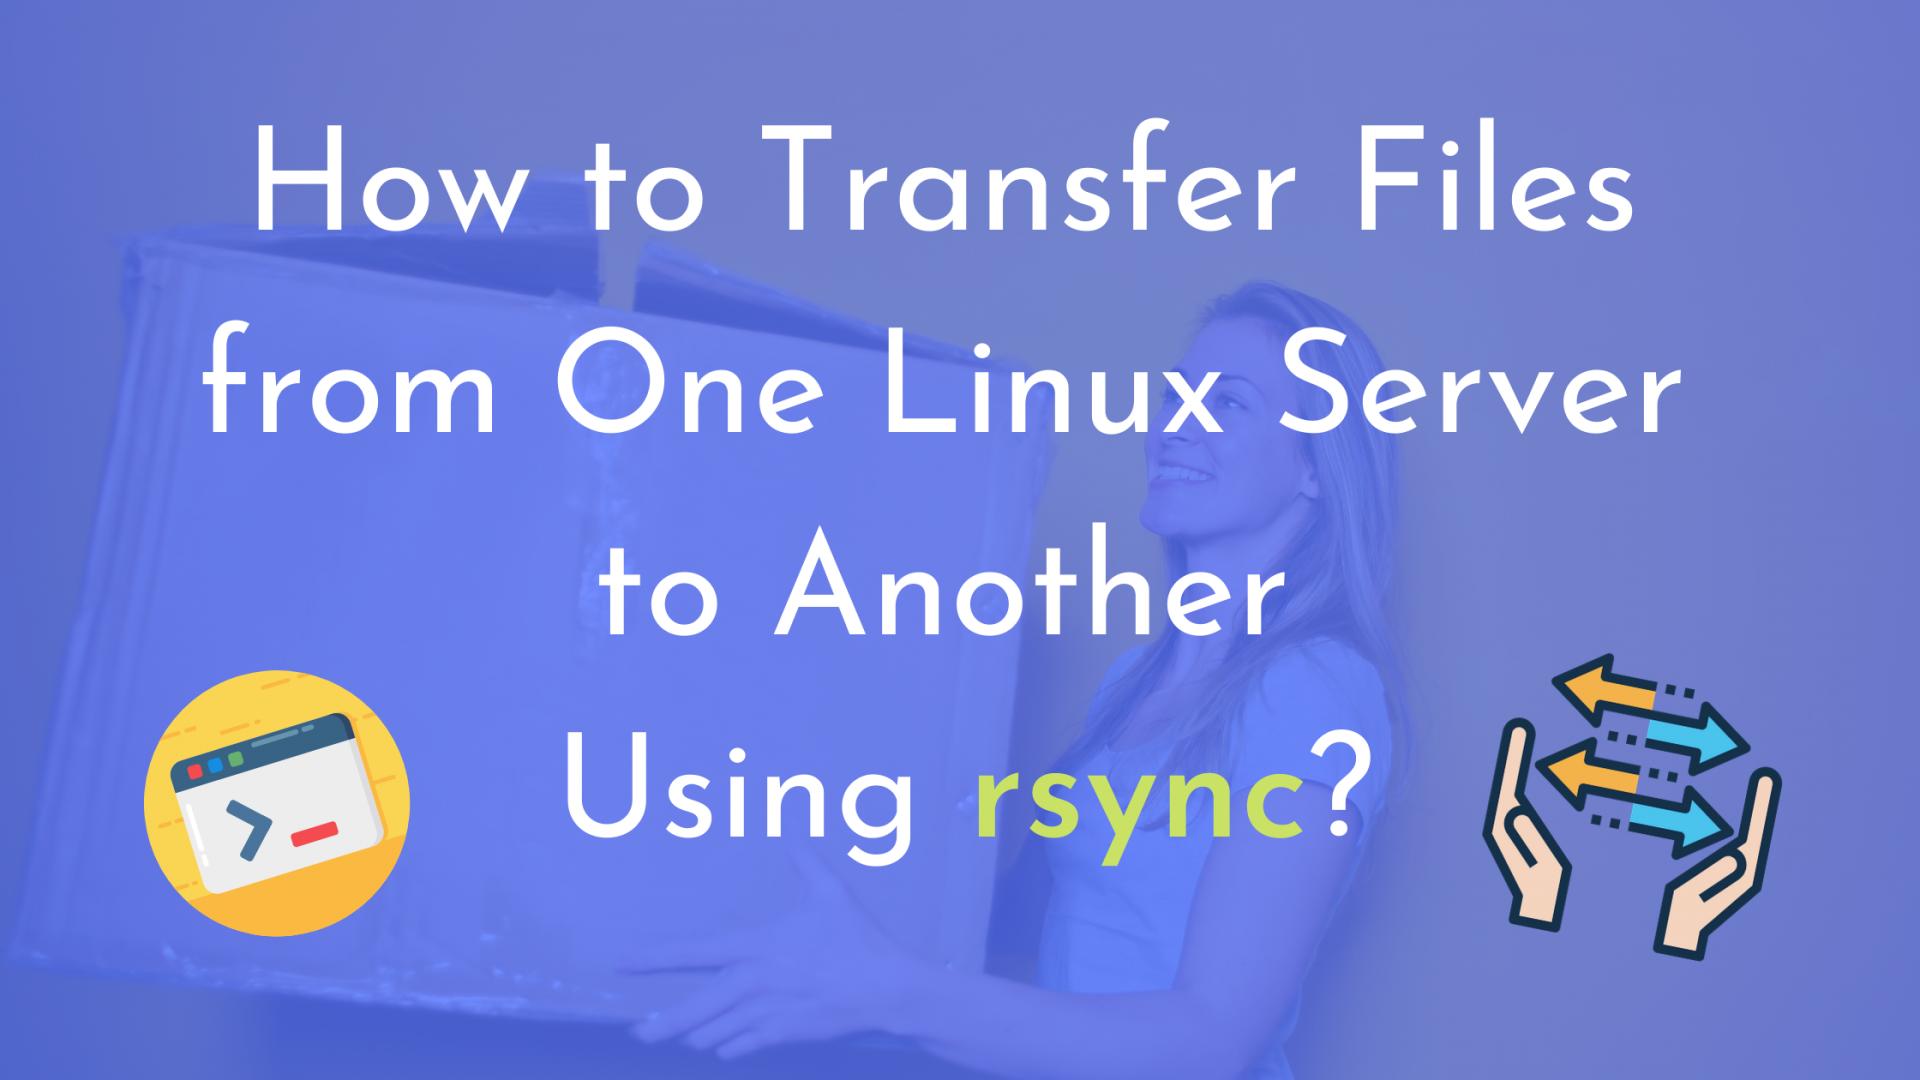 How to Transfer Files from One Linux Server to Another Using rsync?